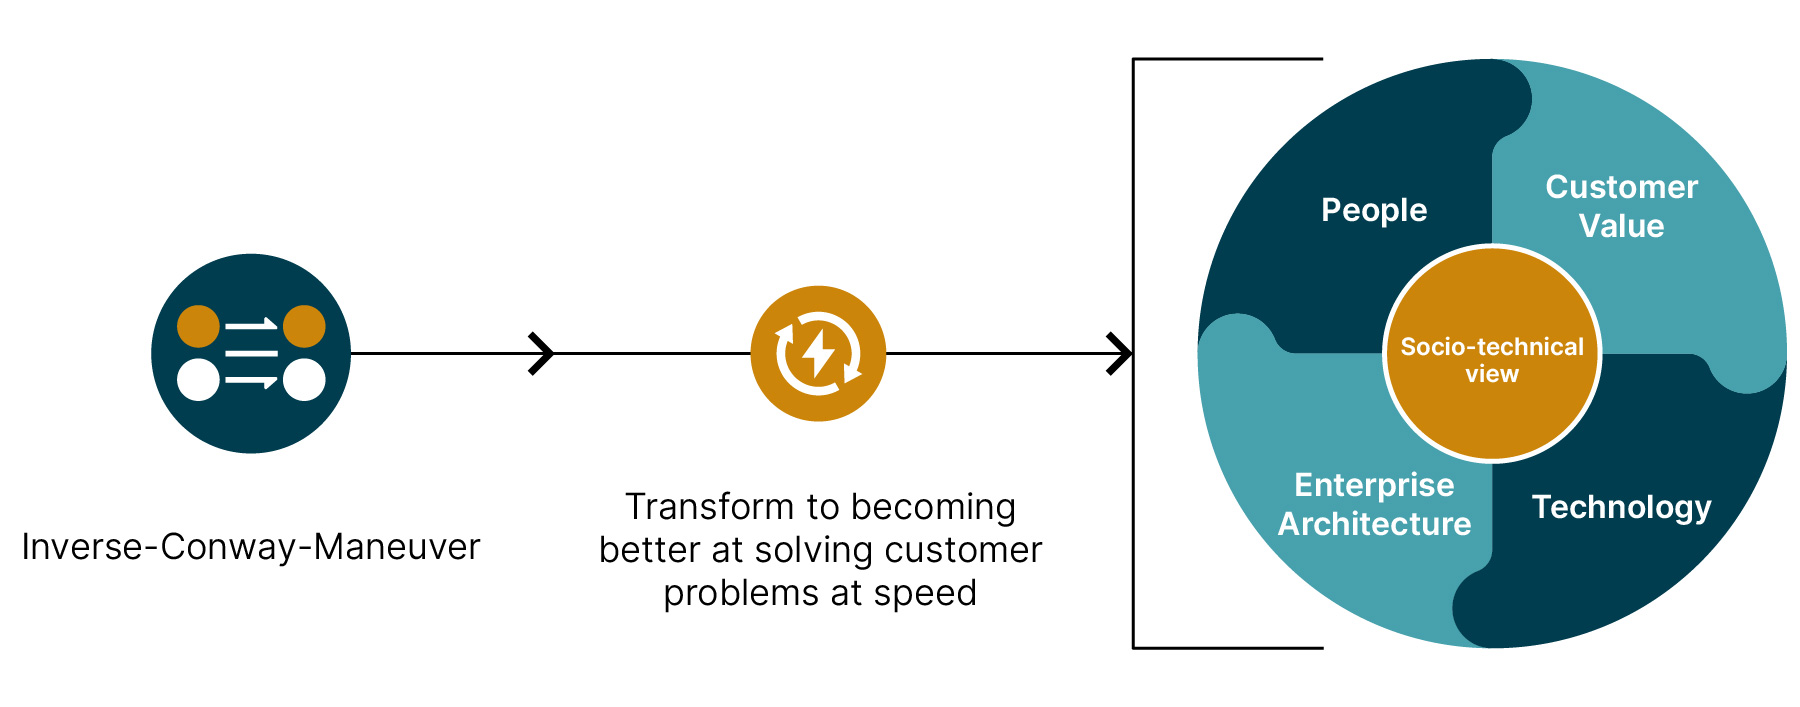 Inverse-Conway-Maneuver are transformation programs of organizations aiming for becoming better at solving customer problems at speed. To be successful a holistic socio-technical view needs to be applied for this transformation consisting of: People, customer value, Enterprise Architecture, and technology. 